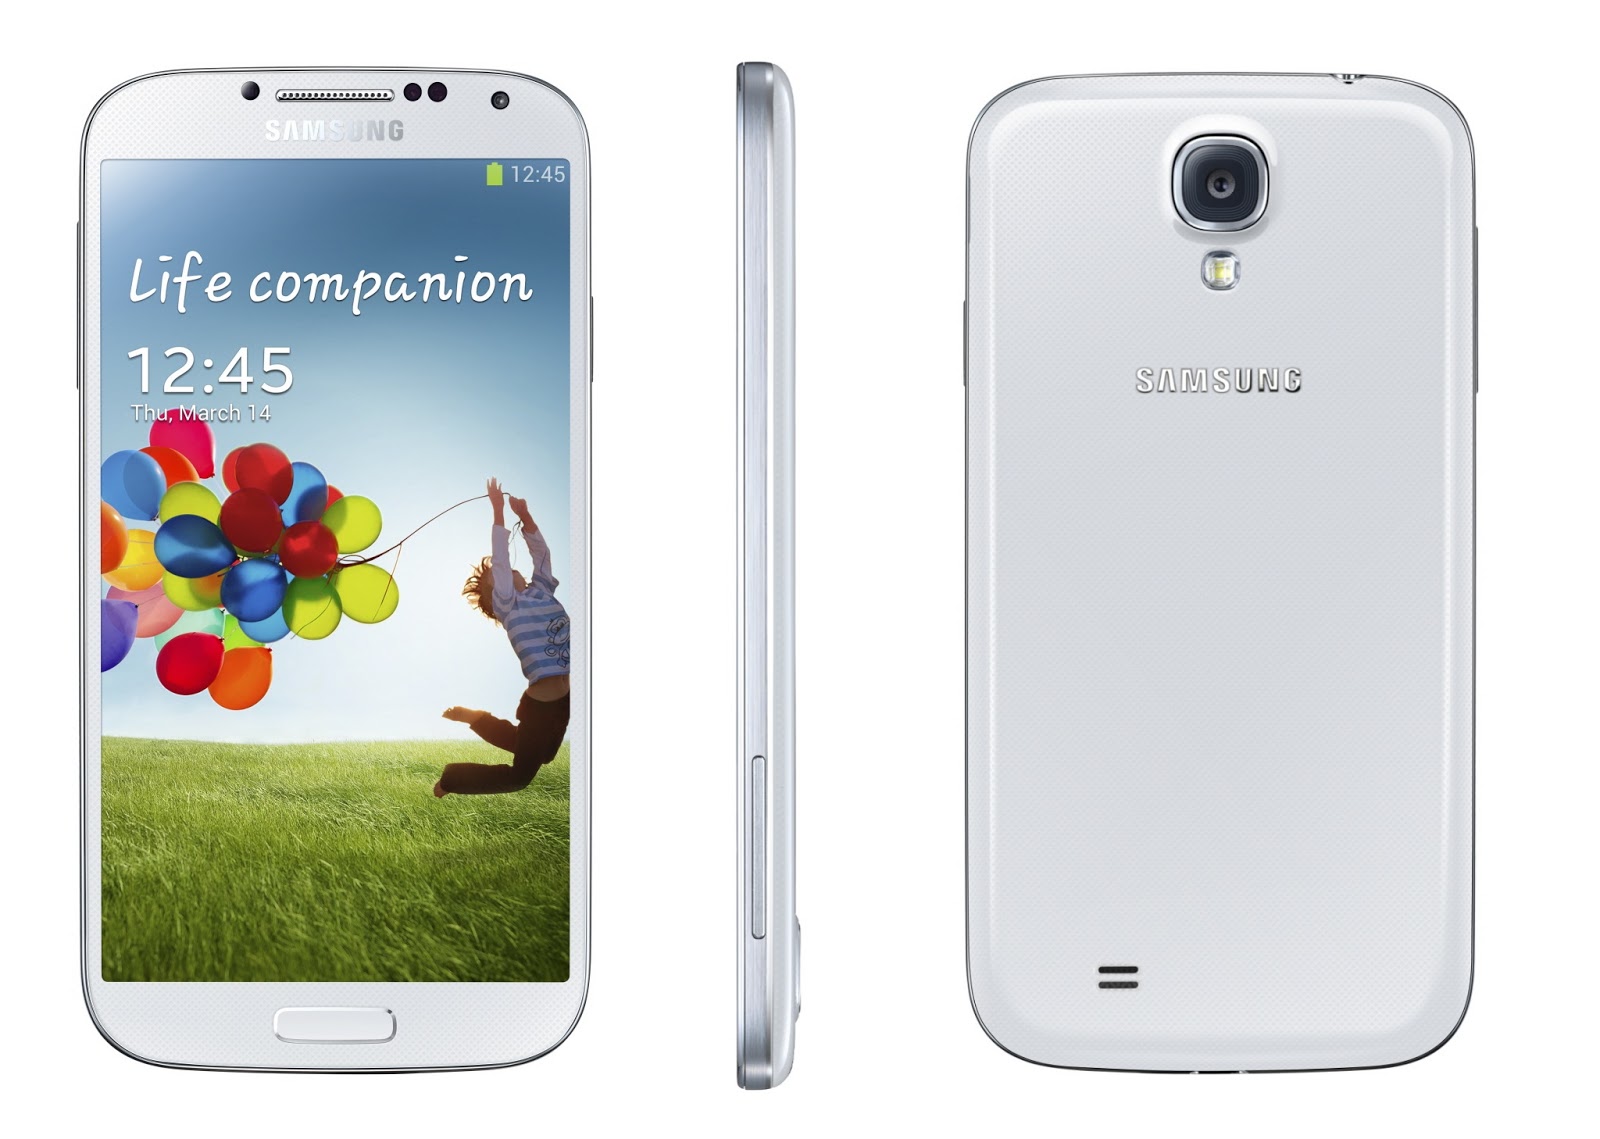 U.S. Mobile Devices: Cheapest Samsung Galaxy S4